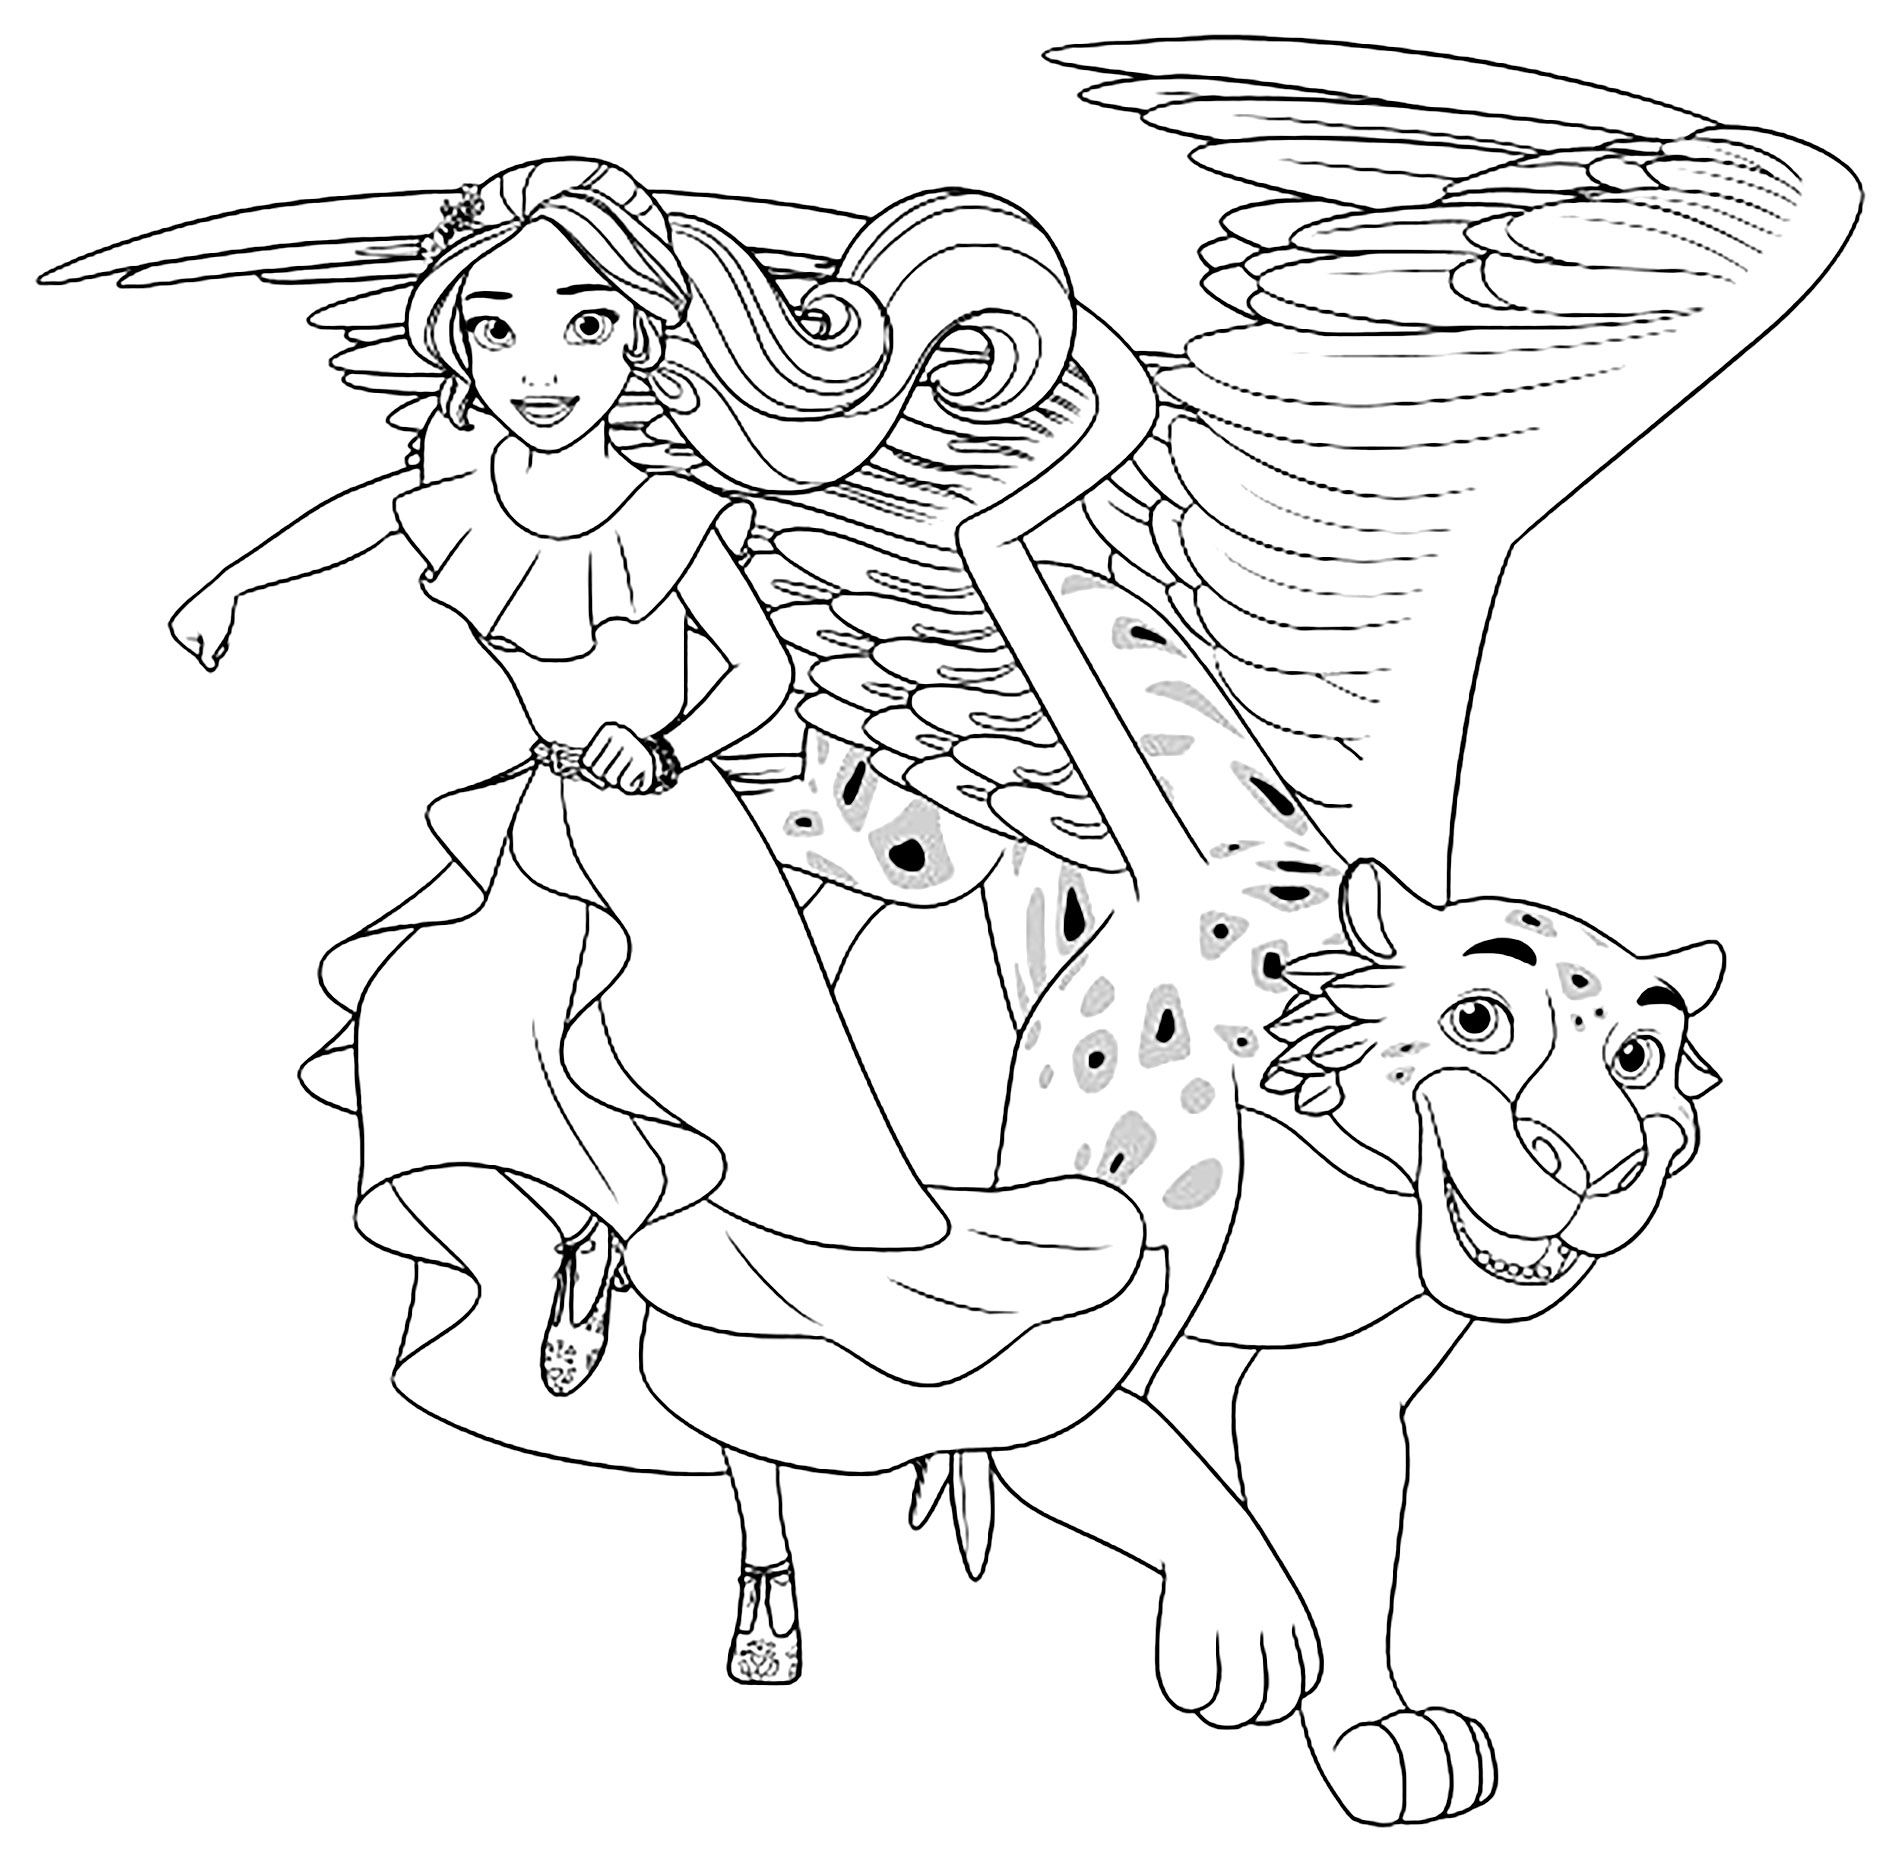 Disney Elena Of Avalor Printable Coloring Pages Book Sketch Coloring Page